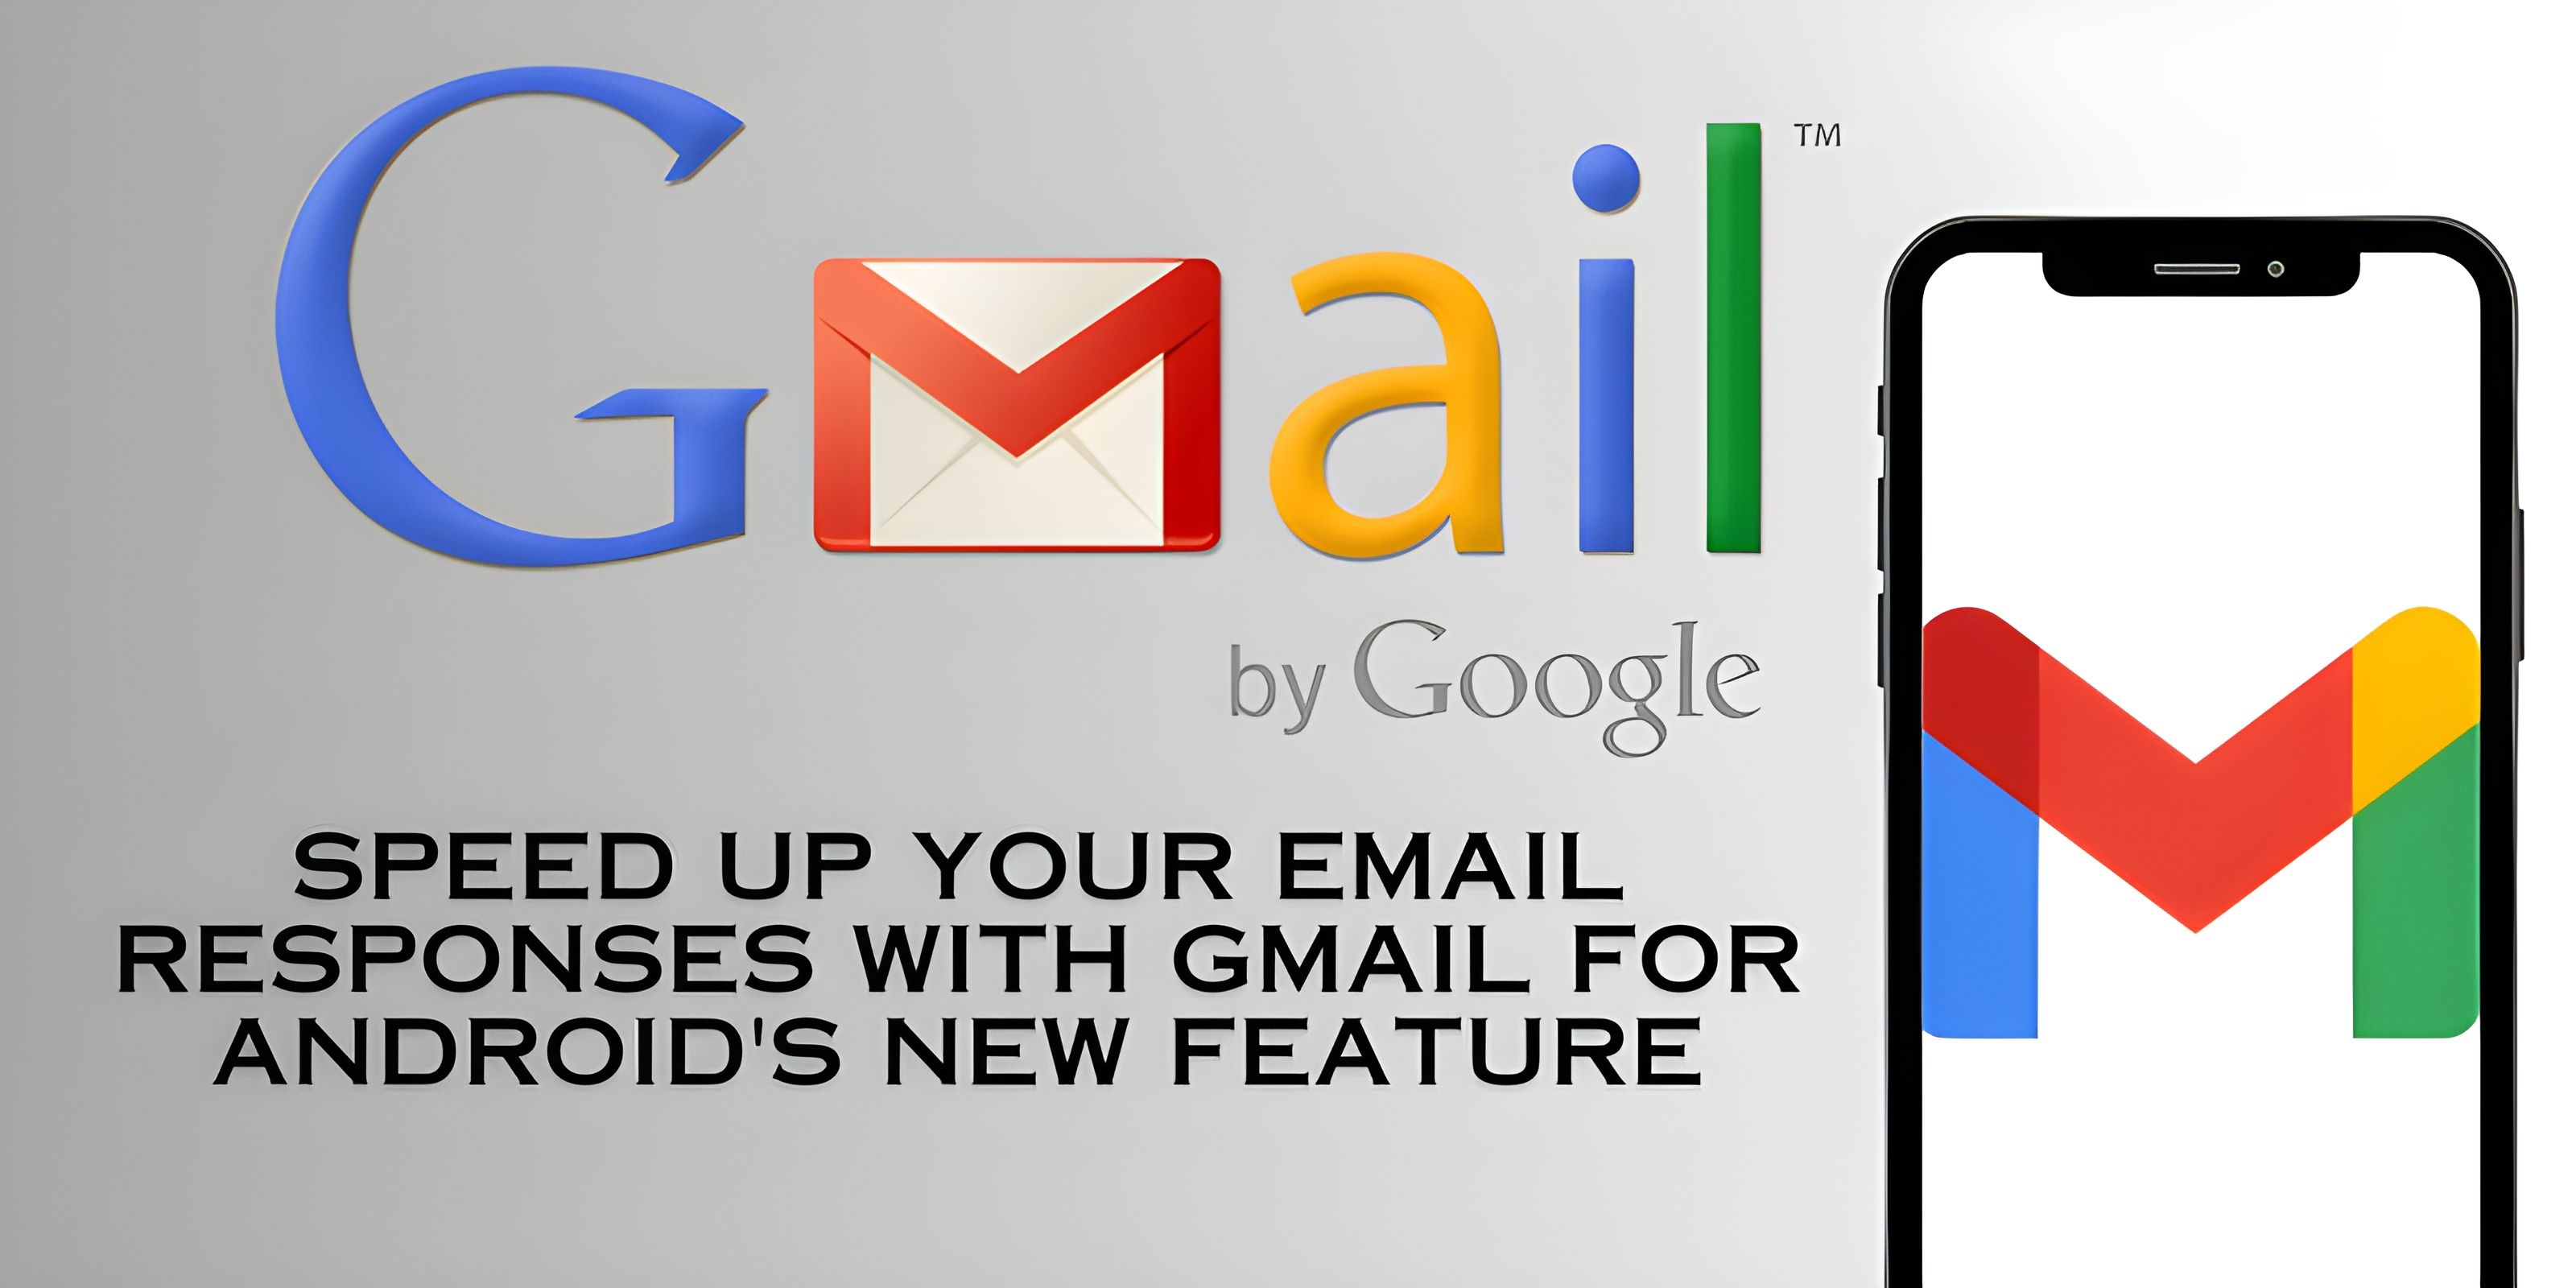 Speed Up Your Email Responses with Gmail for Android's New Feature